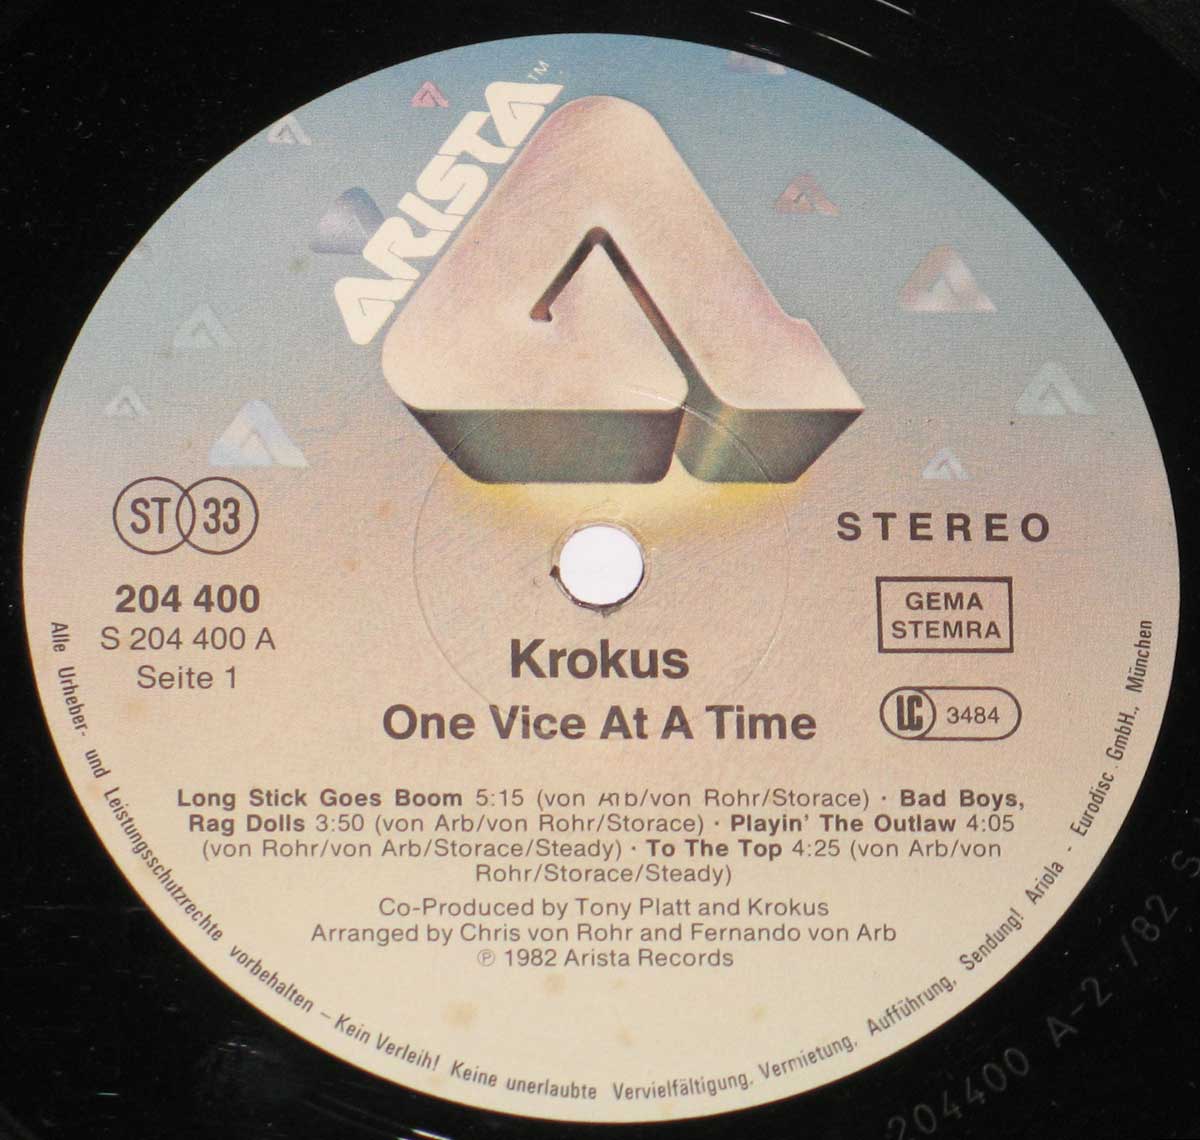 Close-up Photo of "One Vice at a Time" Arista 204 400 Record Label  